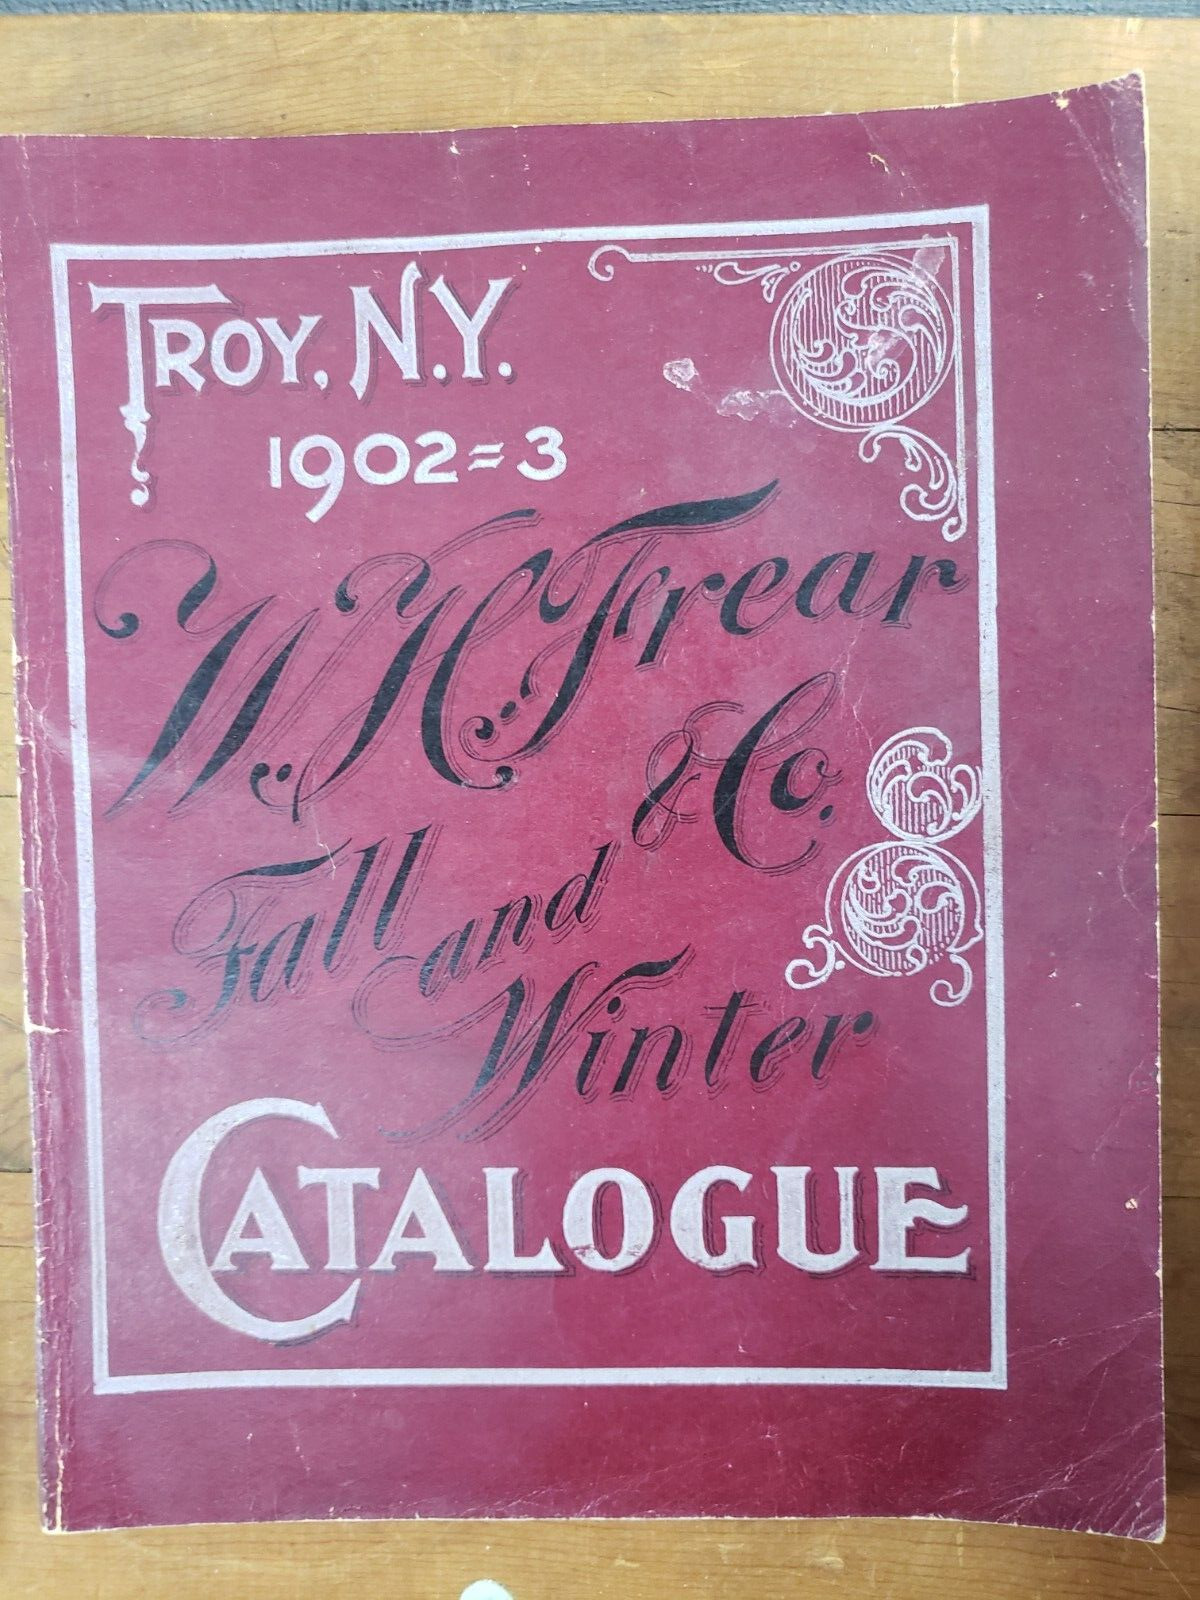 Antique 1902 Frear's Catalog Troy NY Corsets Clothing Shoes Furniture 159 Pages